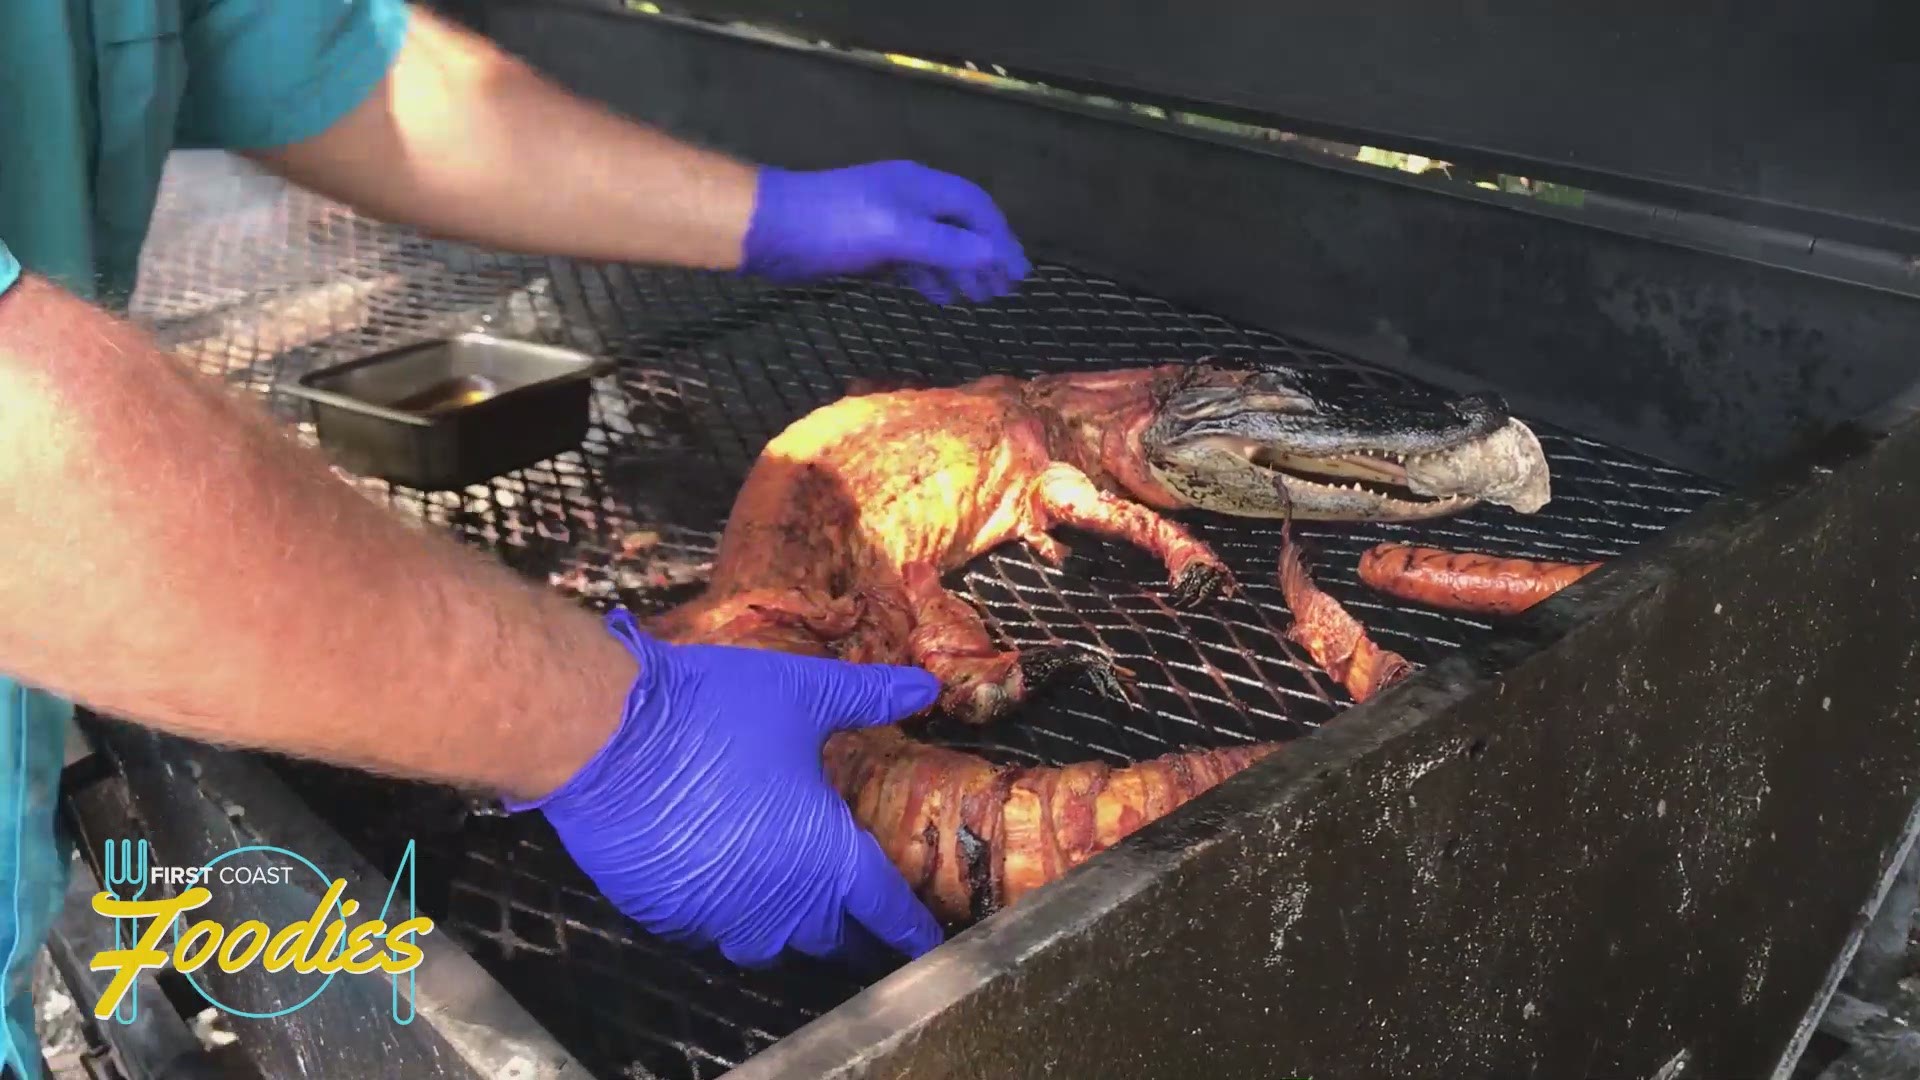 Clark's Fish Camp is known for serving exotic food. Next week, First Coast Foodies will take you into the kitchen of the restaurant, telling you how and why the full smoked gator (covered in bacon) dish came to be!